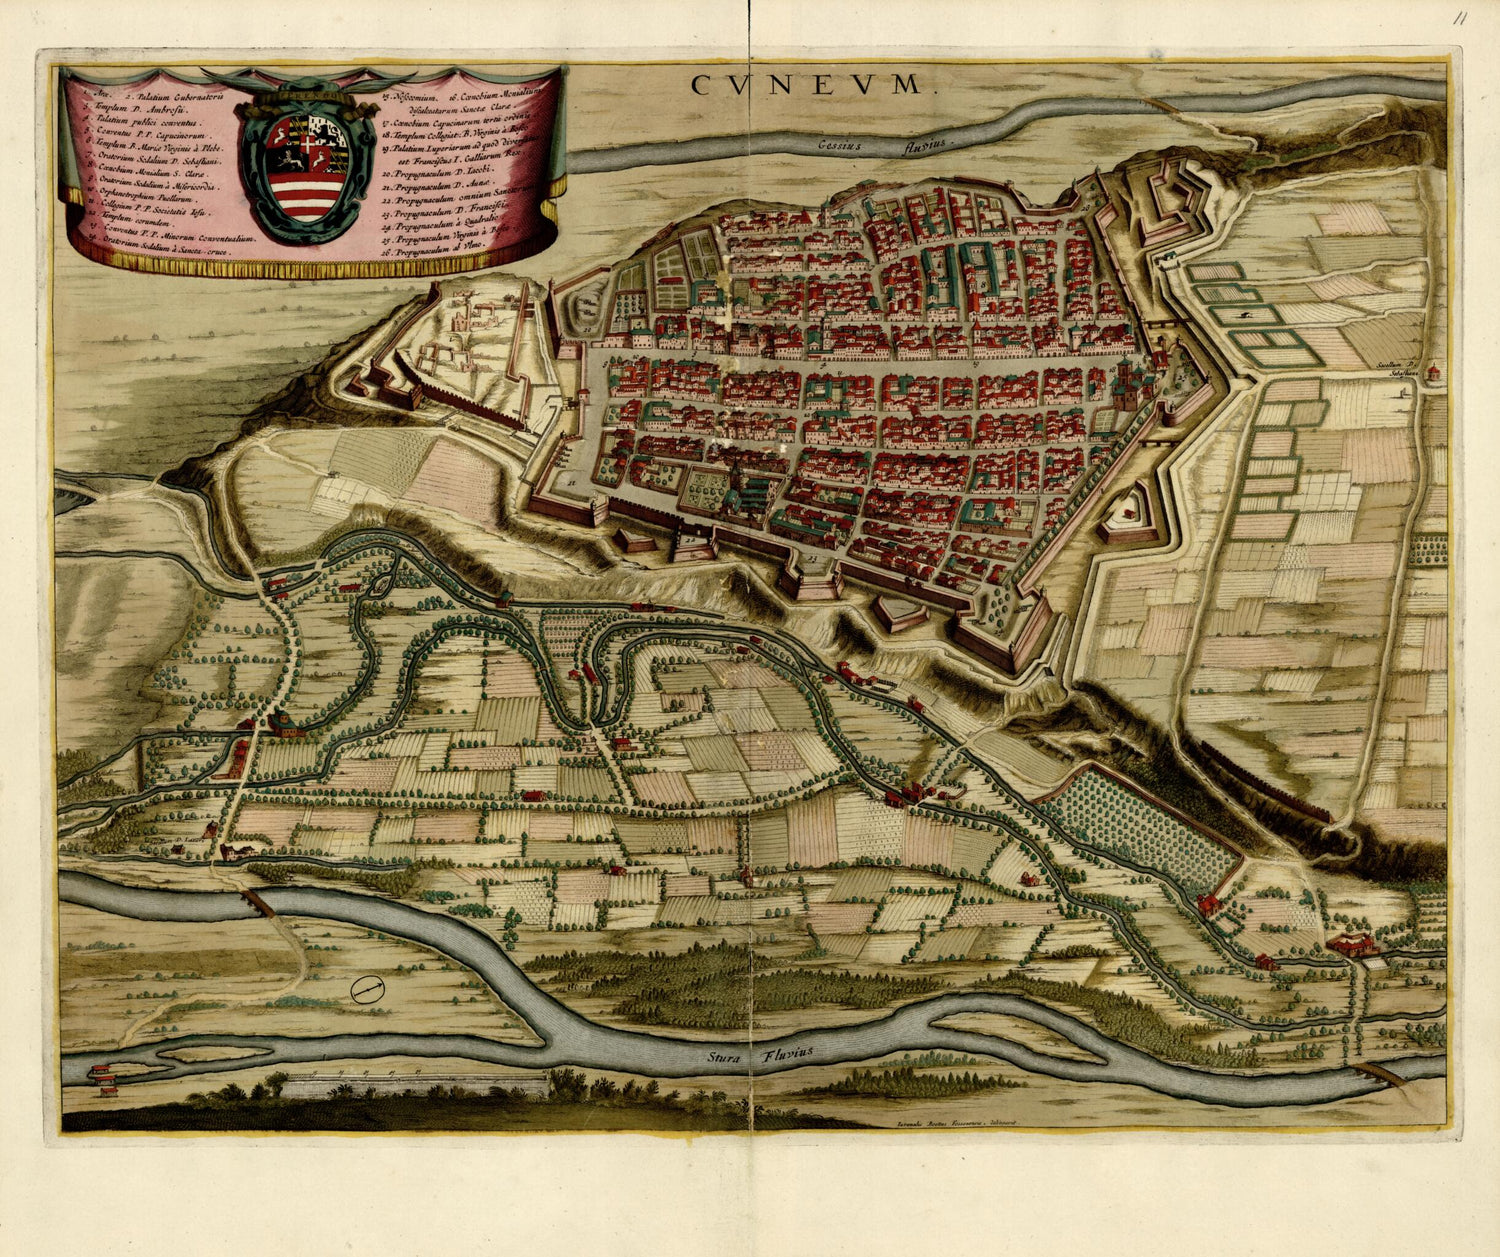 This old map of Cvnevm from a Collection of Plans of Fortifications and Battles, 1684-from 1709 from 1709 was created by Anna Beeck in 1709